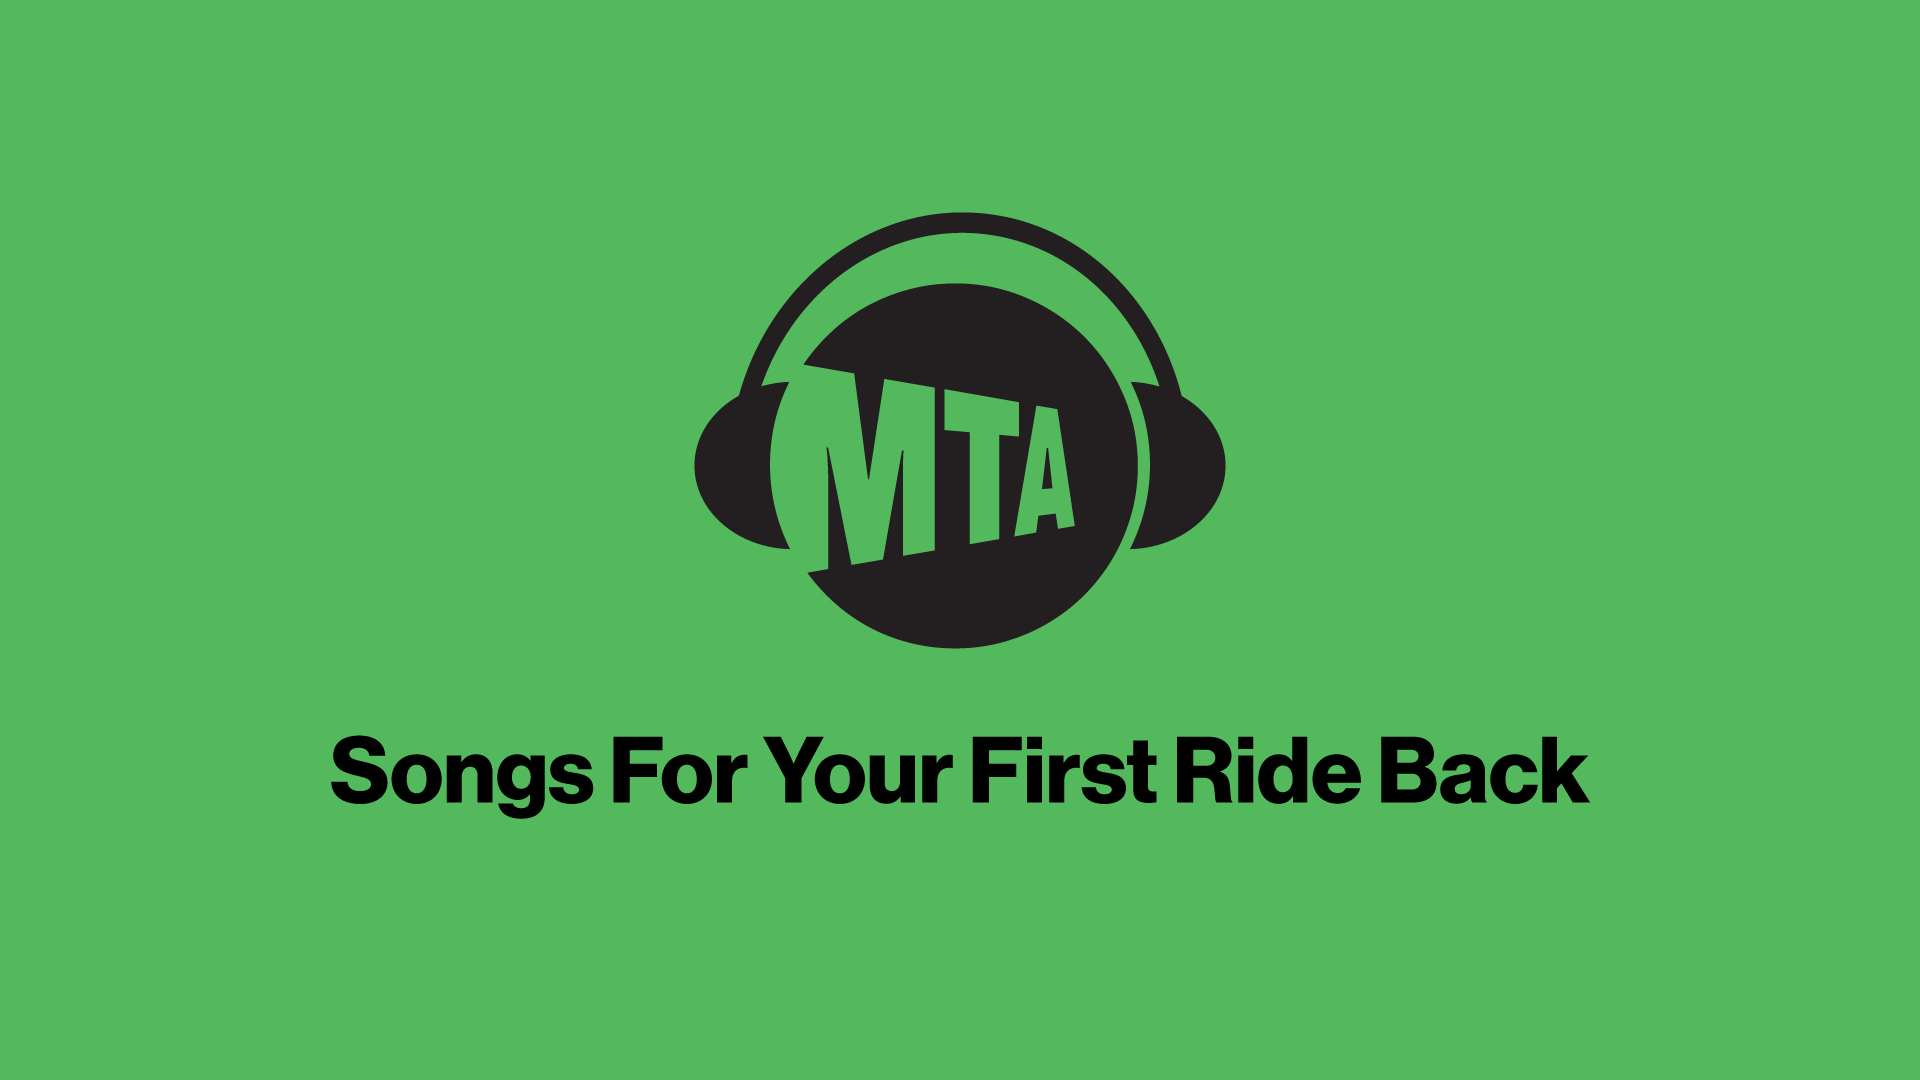 MTA Launches New #TakeTheTrain Spotify Playlists to Welcome Riders Back to the Transit System